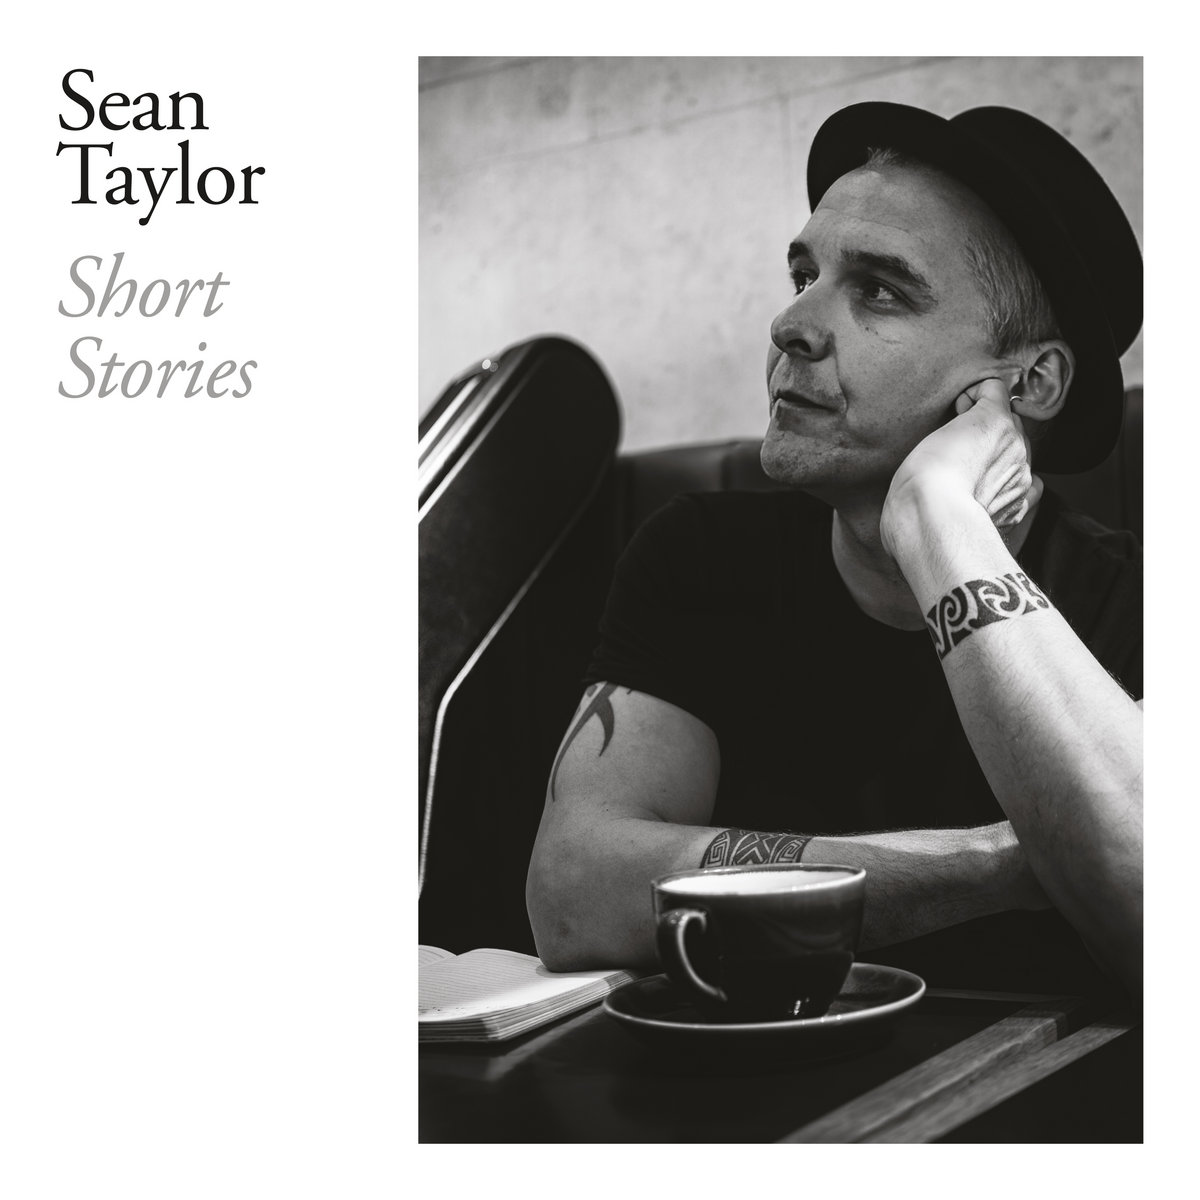 Taken from his forthcoming 'Short Stories' album, @SeanTaylorsongs delivers the ice on 'Be Cool'...a smokey jazz number that nods to Tom Waits, the Beat Generation, Miles and Coltrane. Set in a sweltering summer, watch the accompanying video by Shaun Dey. https://t.co/59aAa32wTN https://t.co/qX2TuCj8i5